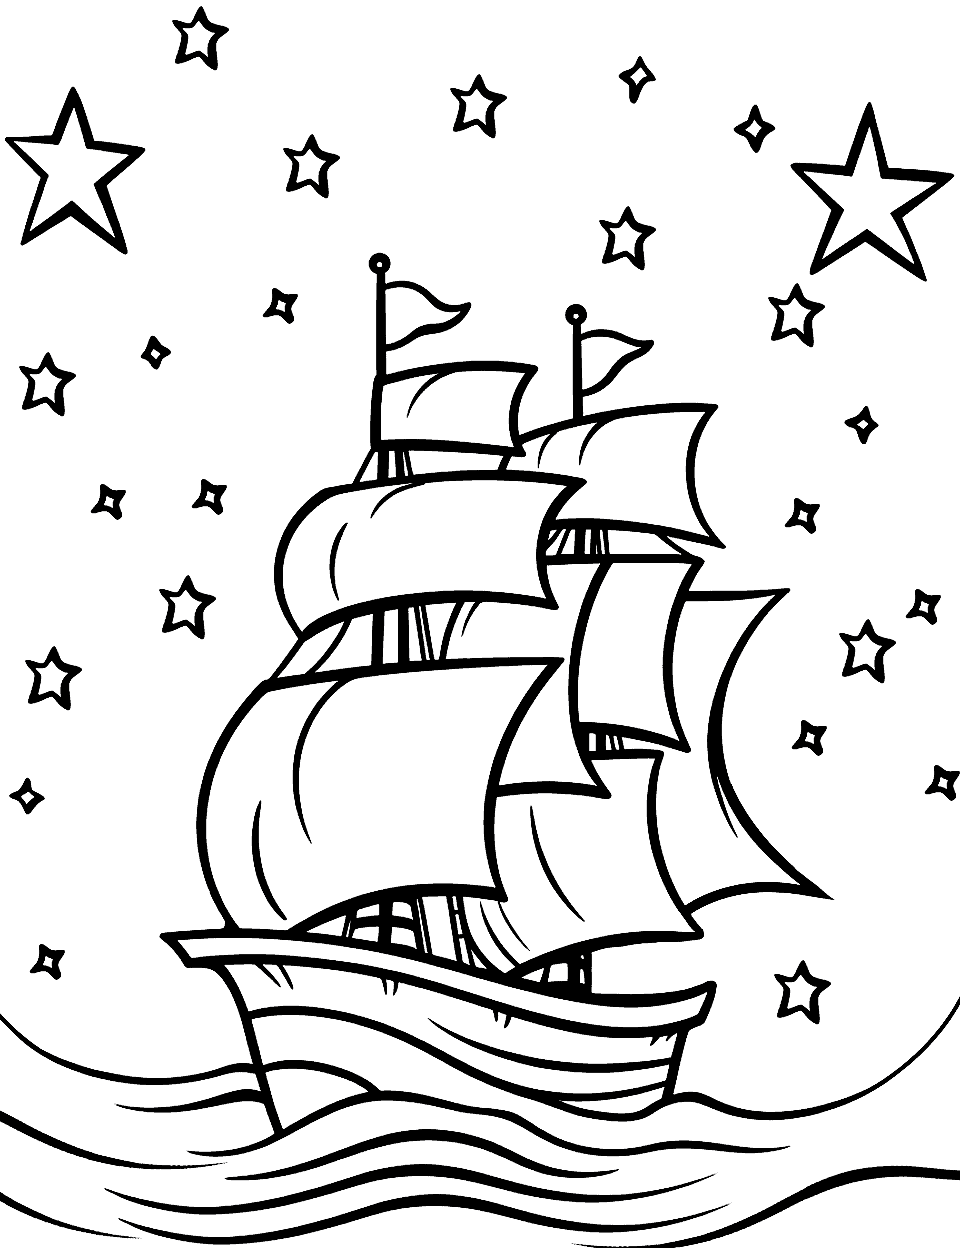 Pirate Ship and Star Coloring Page - A pirate ship sailing under a starry sky.